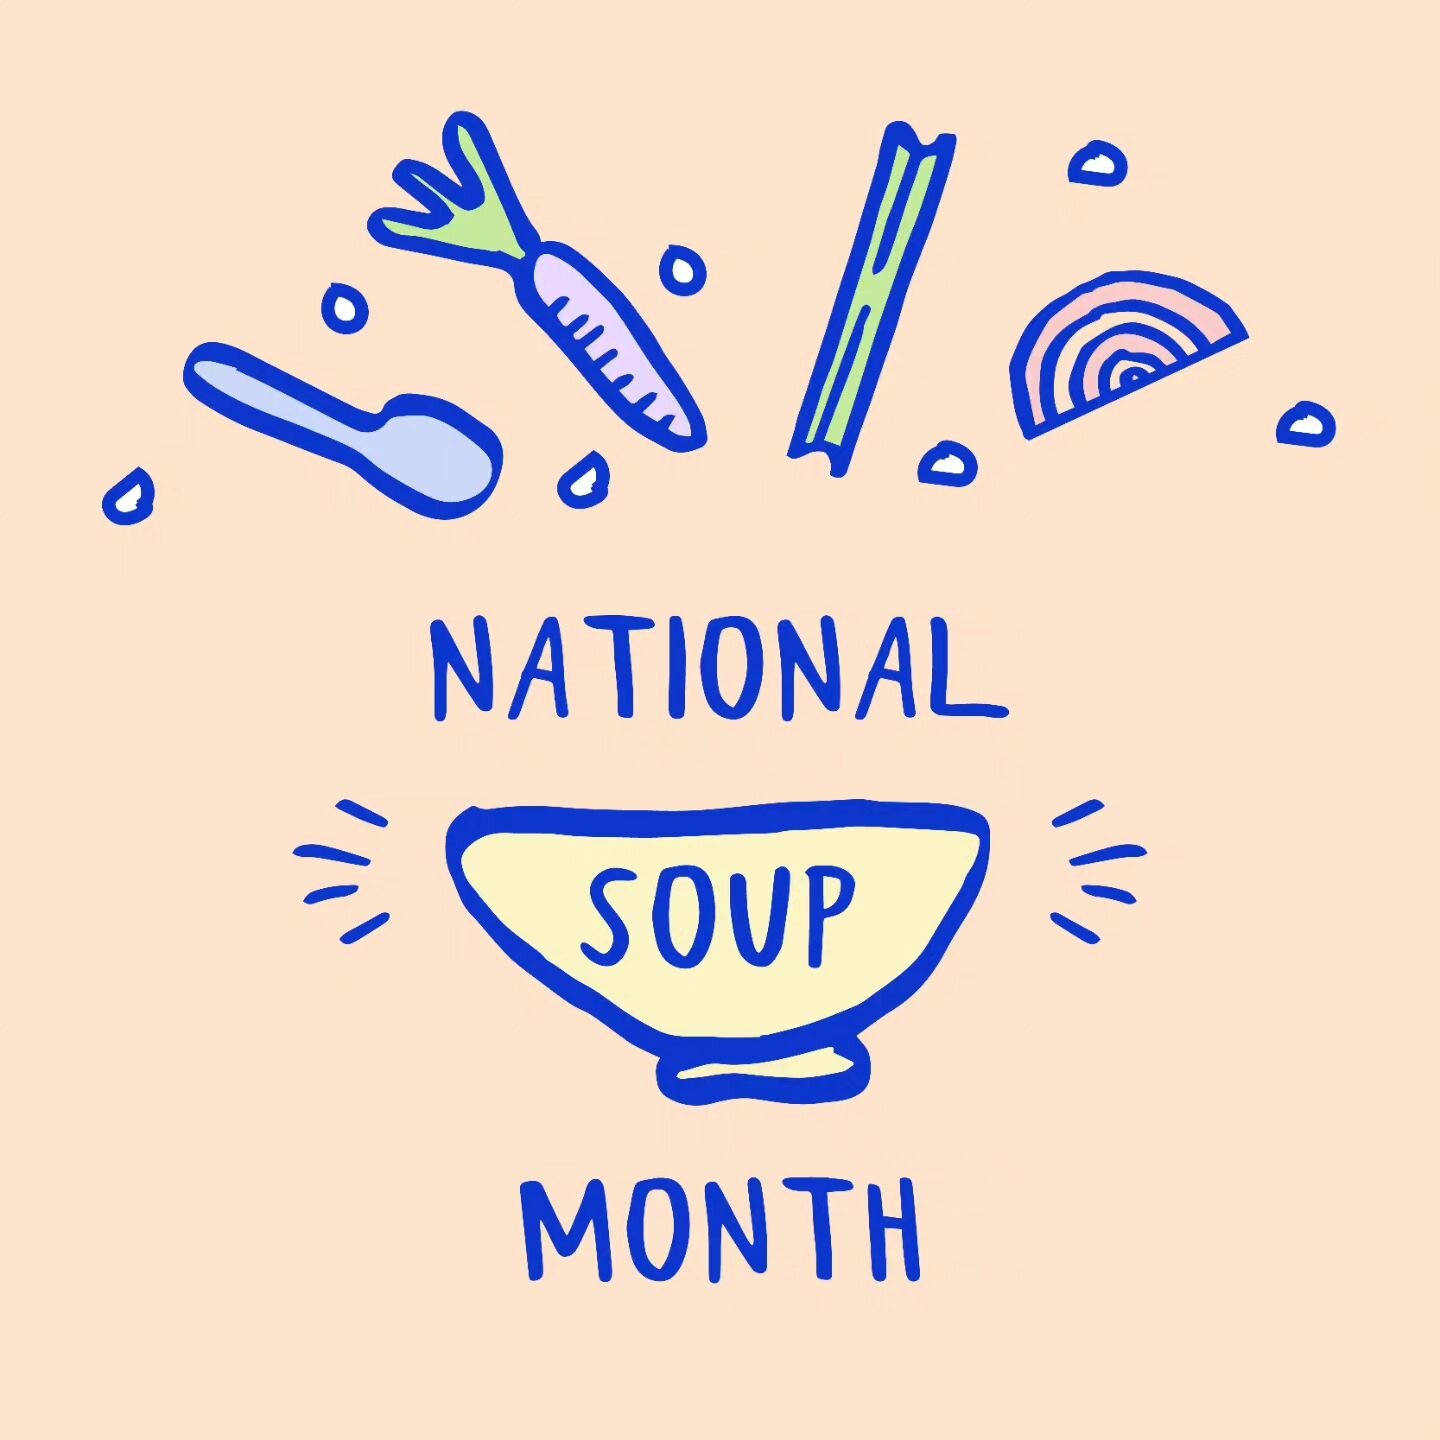 We've been feeling bummed about these negative Chicago temps, and then remembered it's National Soup Month 🍲 The best part about soup besides being warm and cozy, is that you don't need a recipe! You can toss odds and ends, bits and bites into a pot